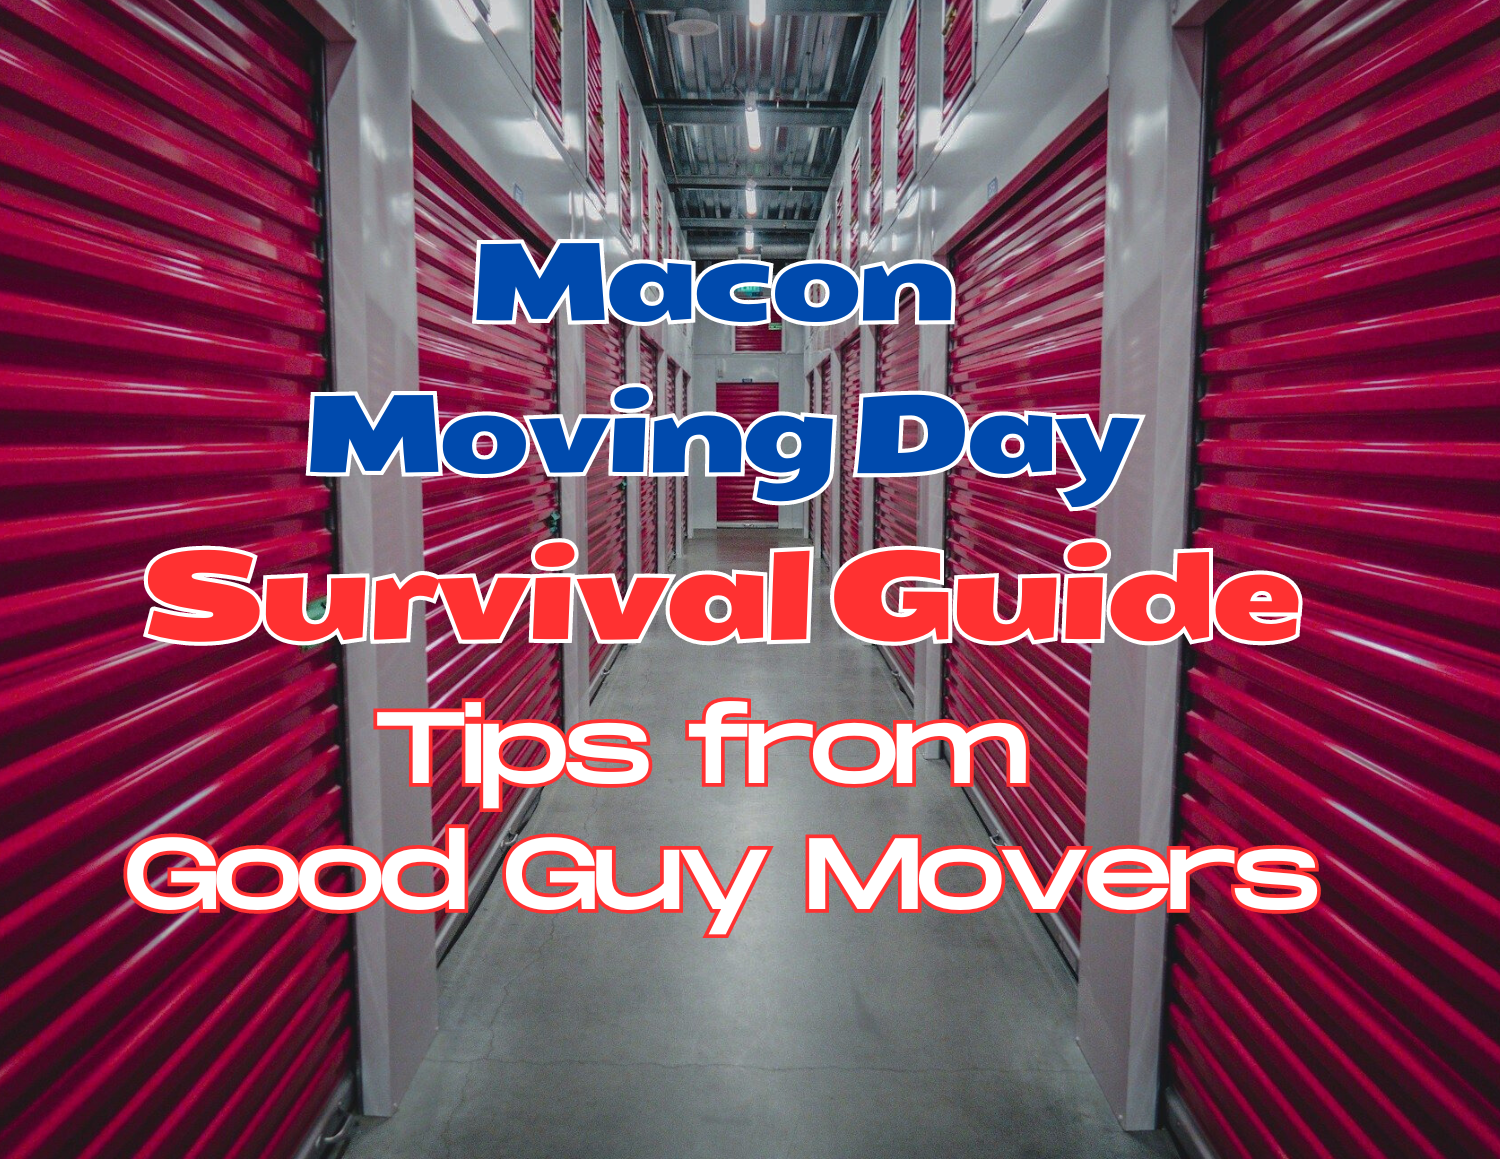 Moving Day Survival Guide Macon Moving Day Survival Guide: Tips from Good Guy Movers